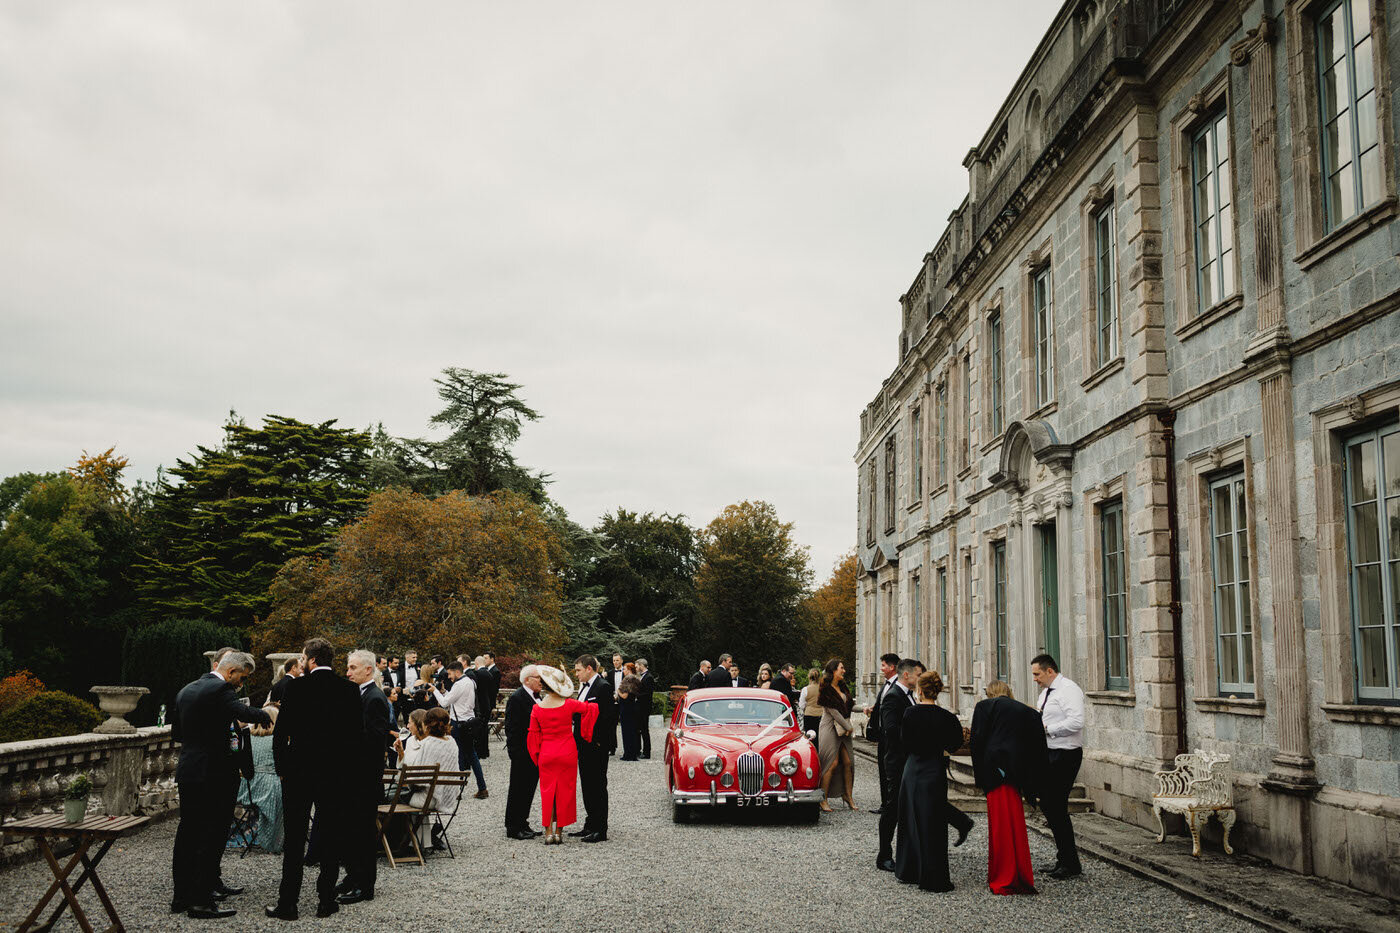 Gloster house wedding